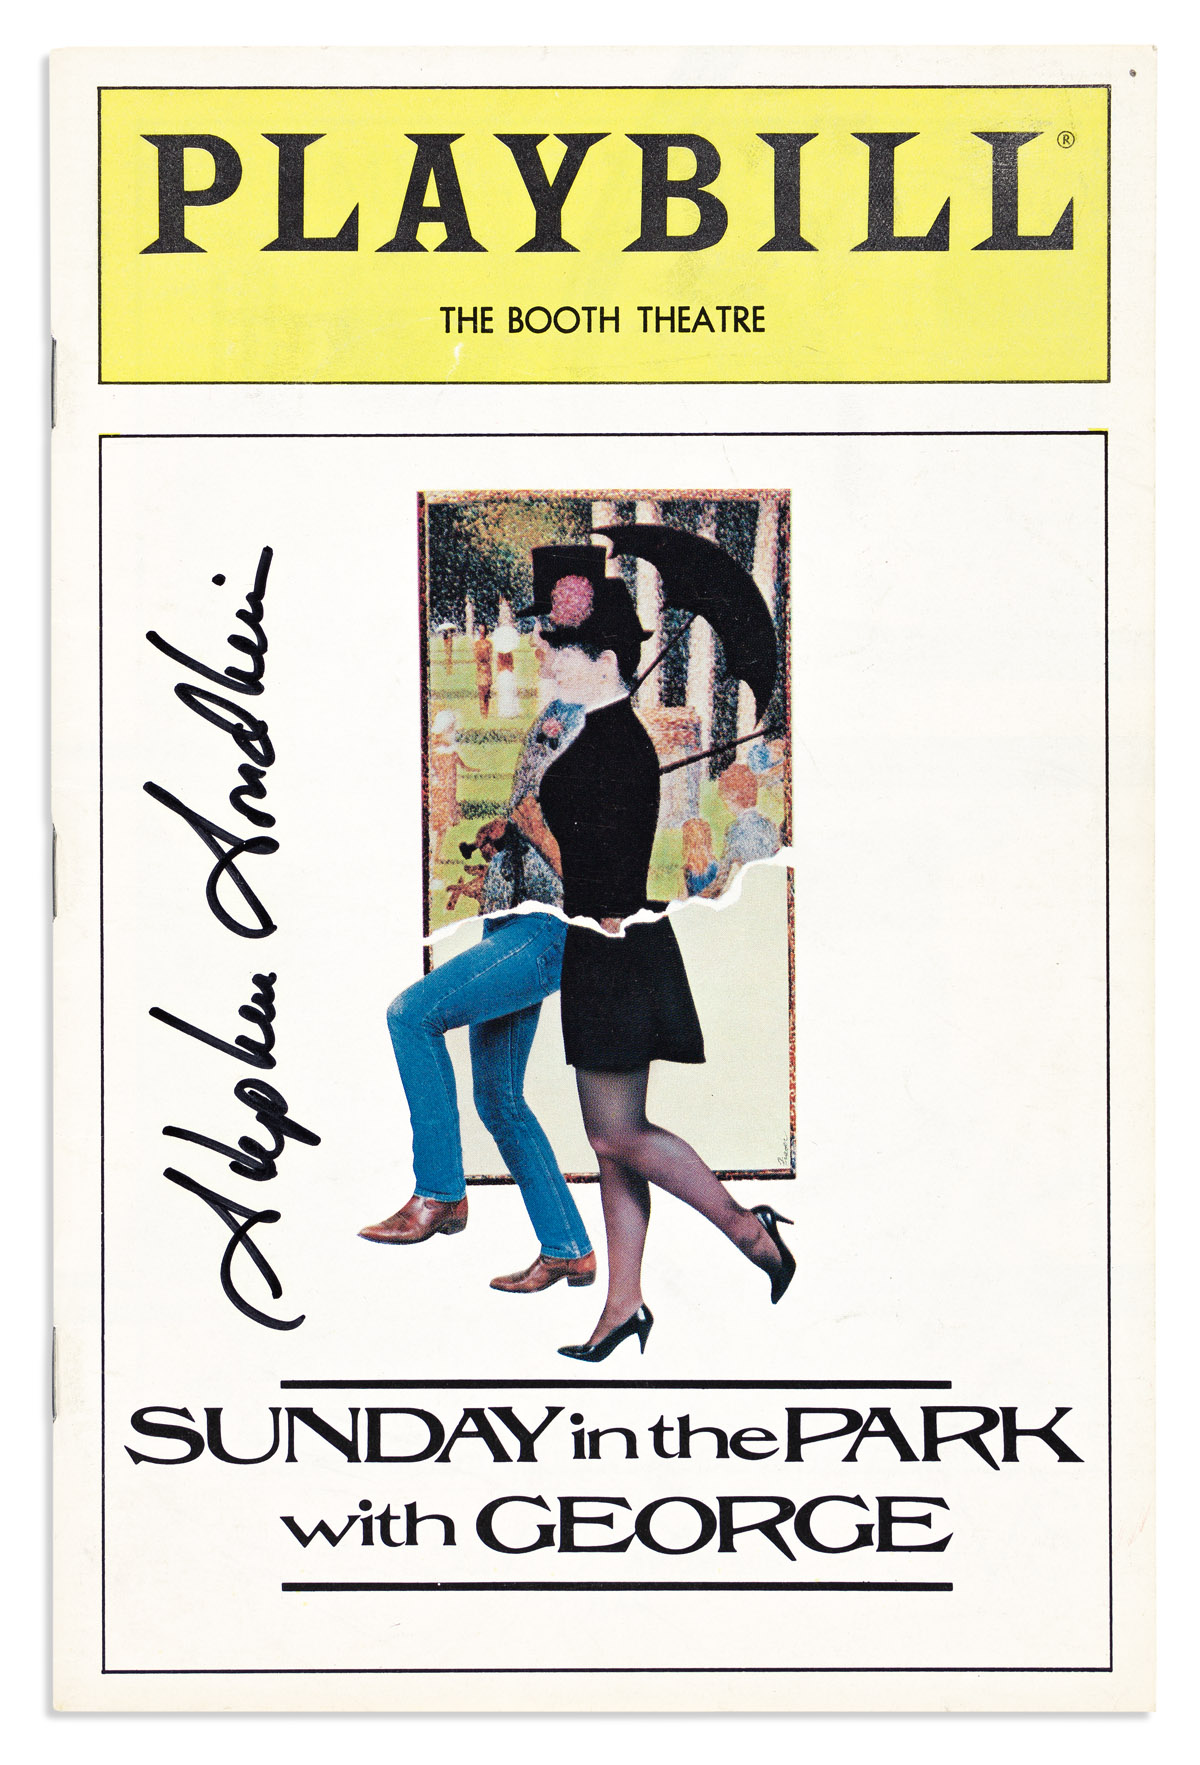 SONDHEIM, STEPHEN. Two programs for his plays, each Signed or Signed and Inscribed on the front cover: